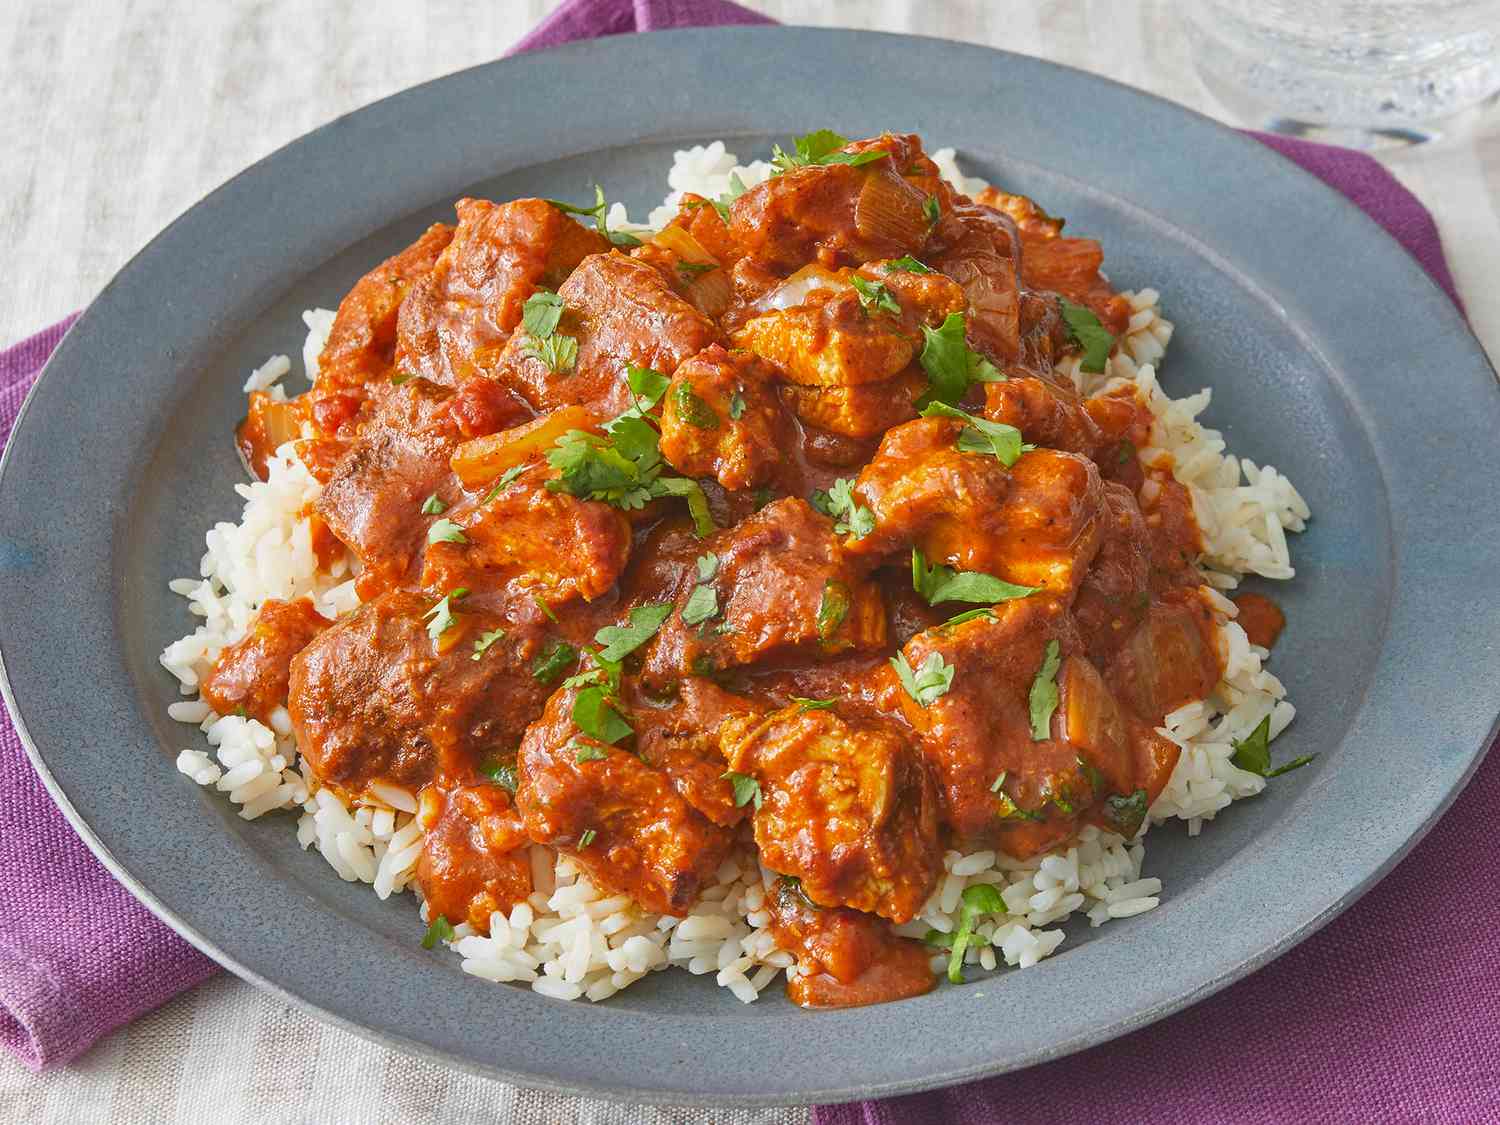 Chicken tikka masala made easy with this delicious recipe